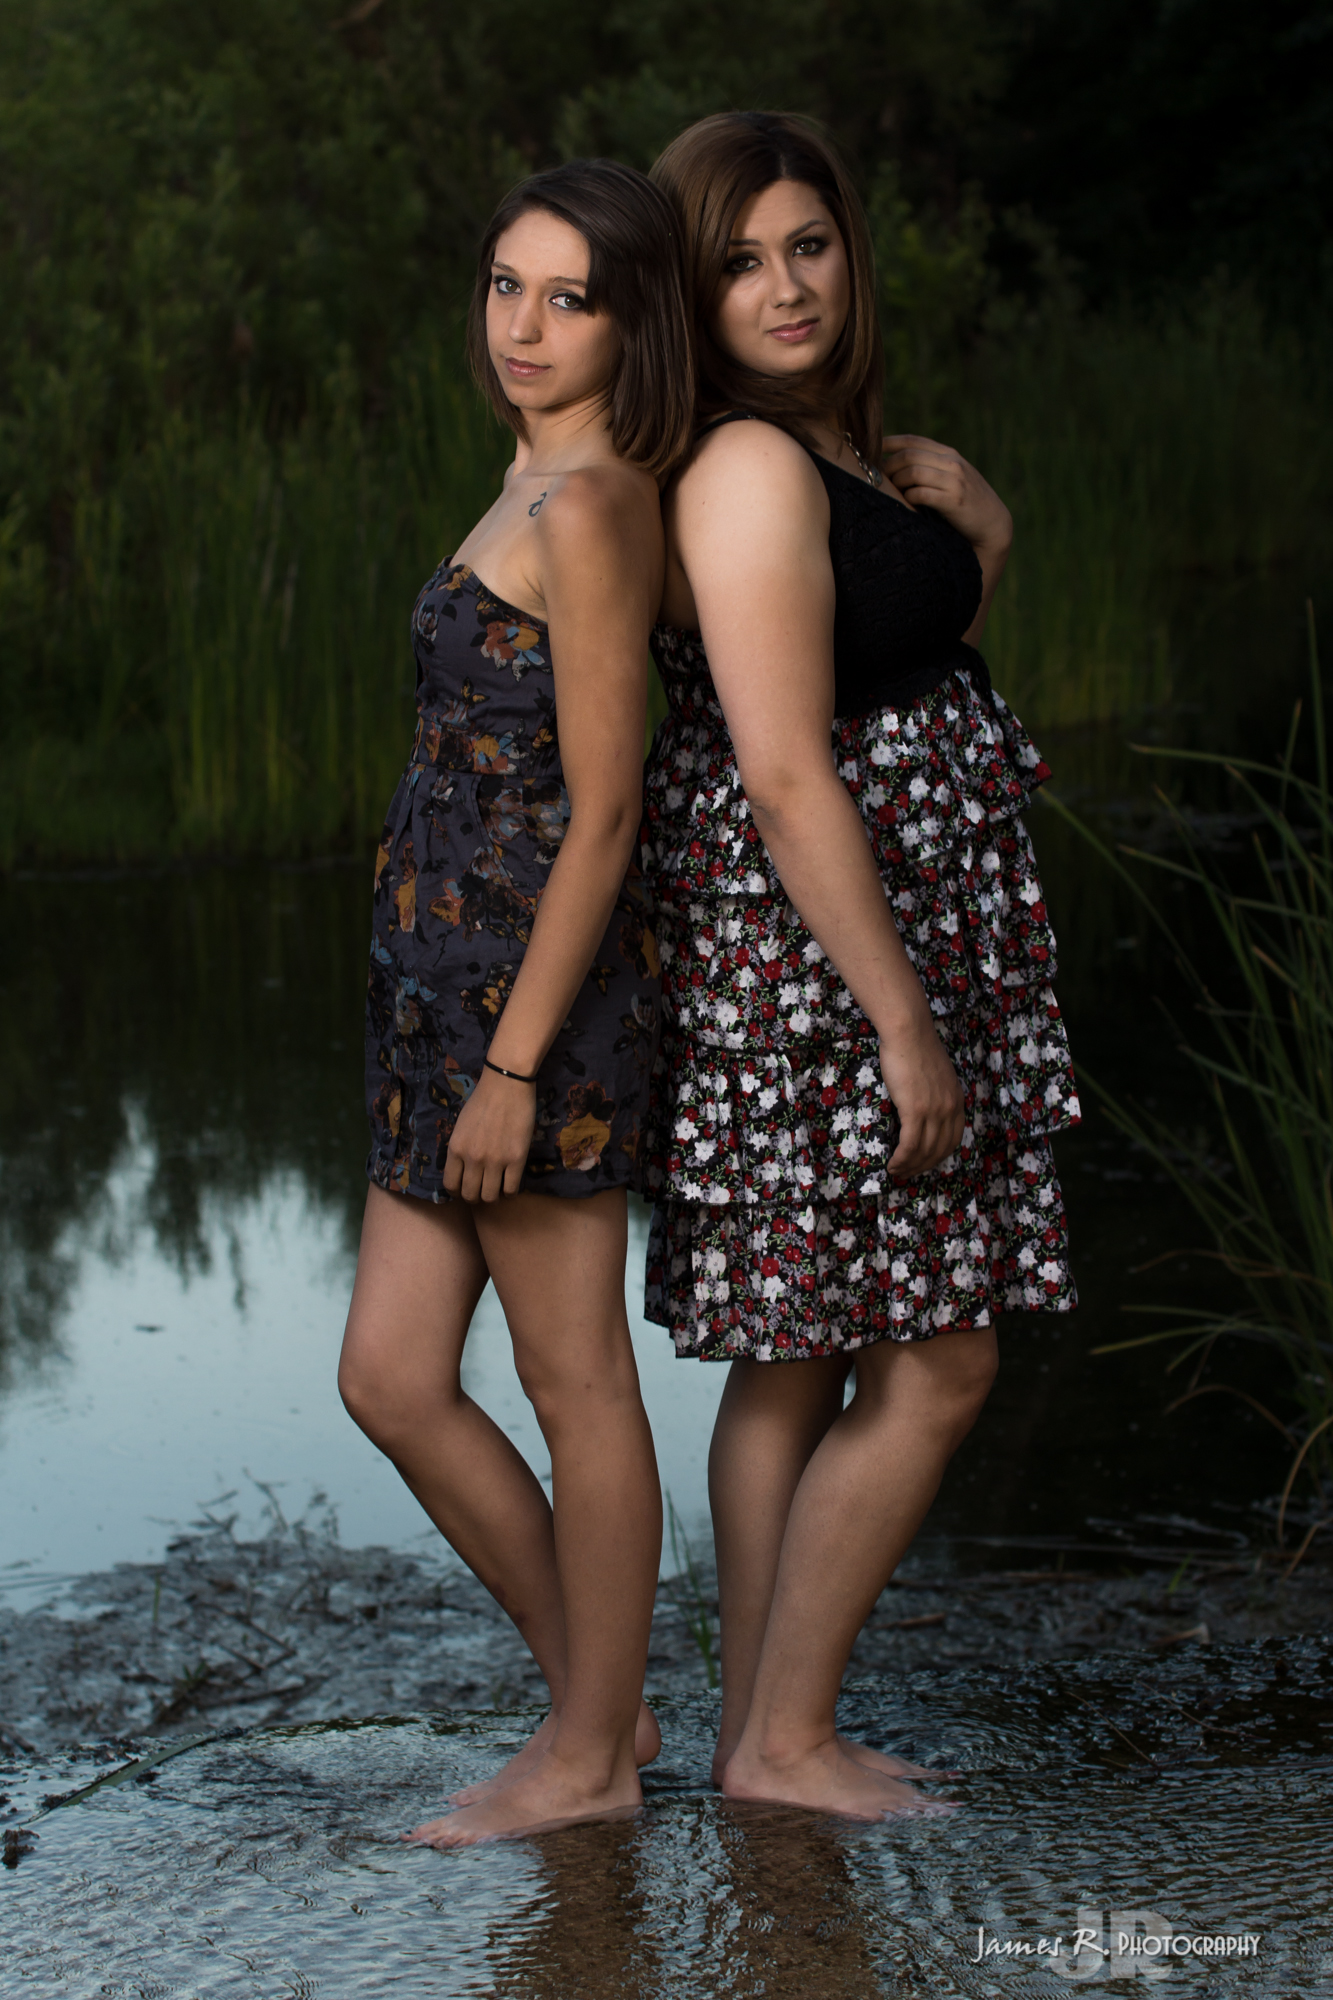 Sister Pose | Sisters photography | Pinterest | Sister poses, Pose ...